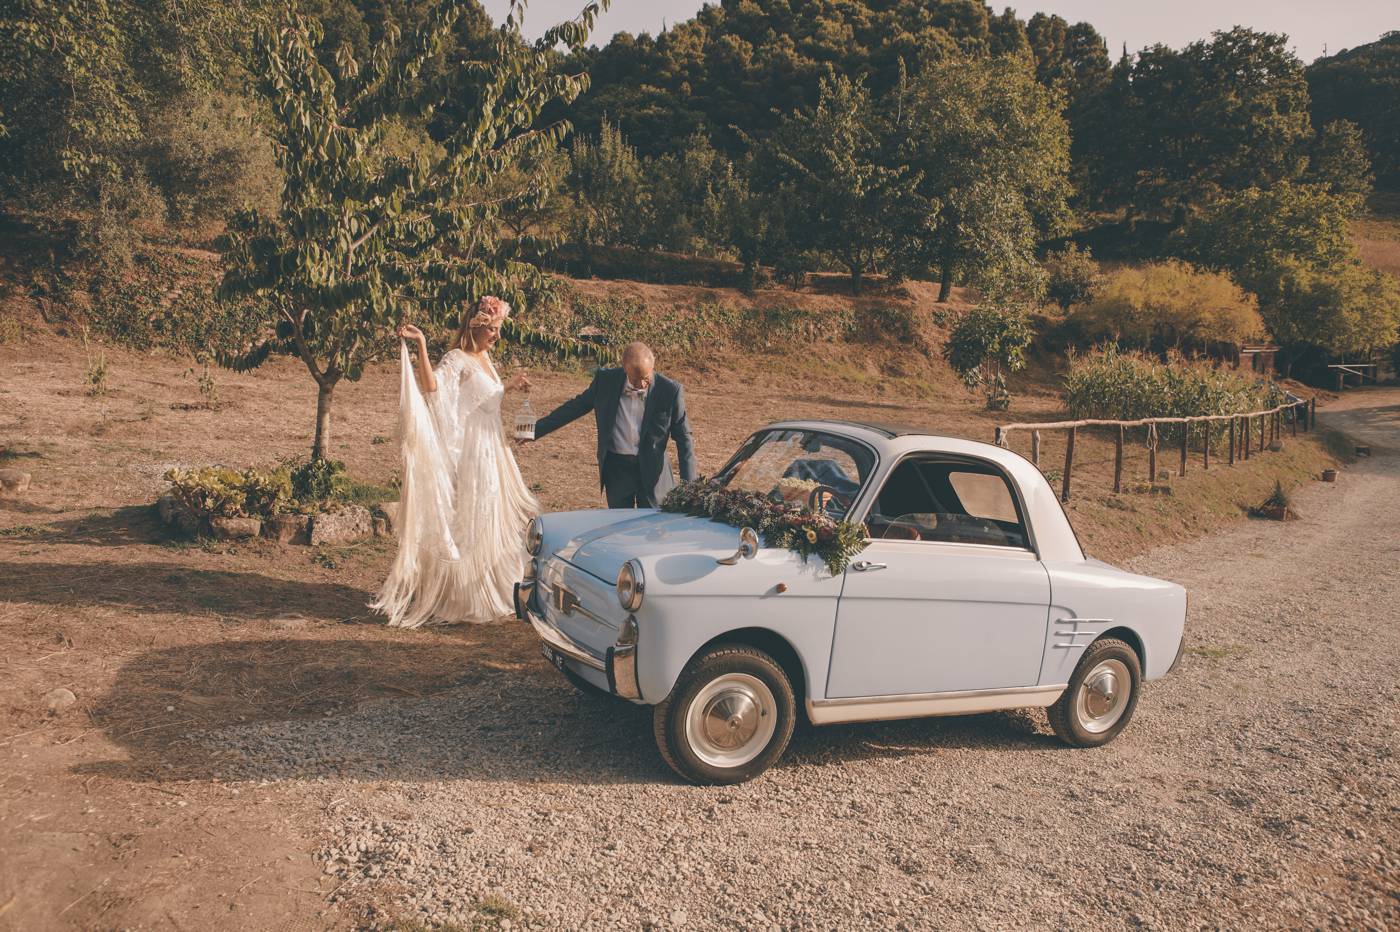 Wedding at one of the most beautiful villages in Sicily and Italy